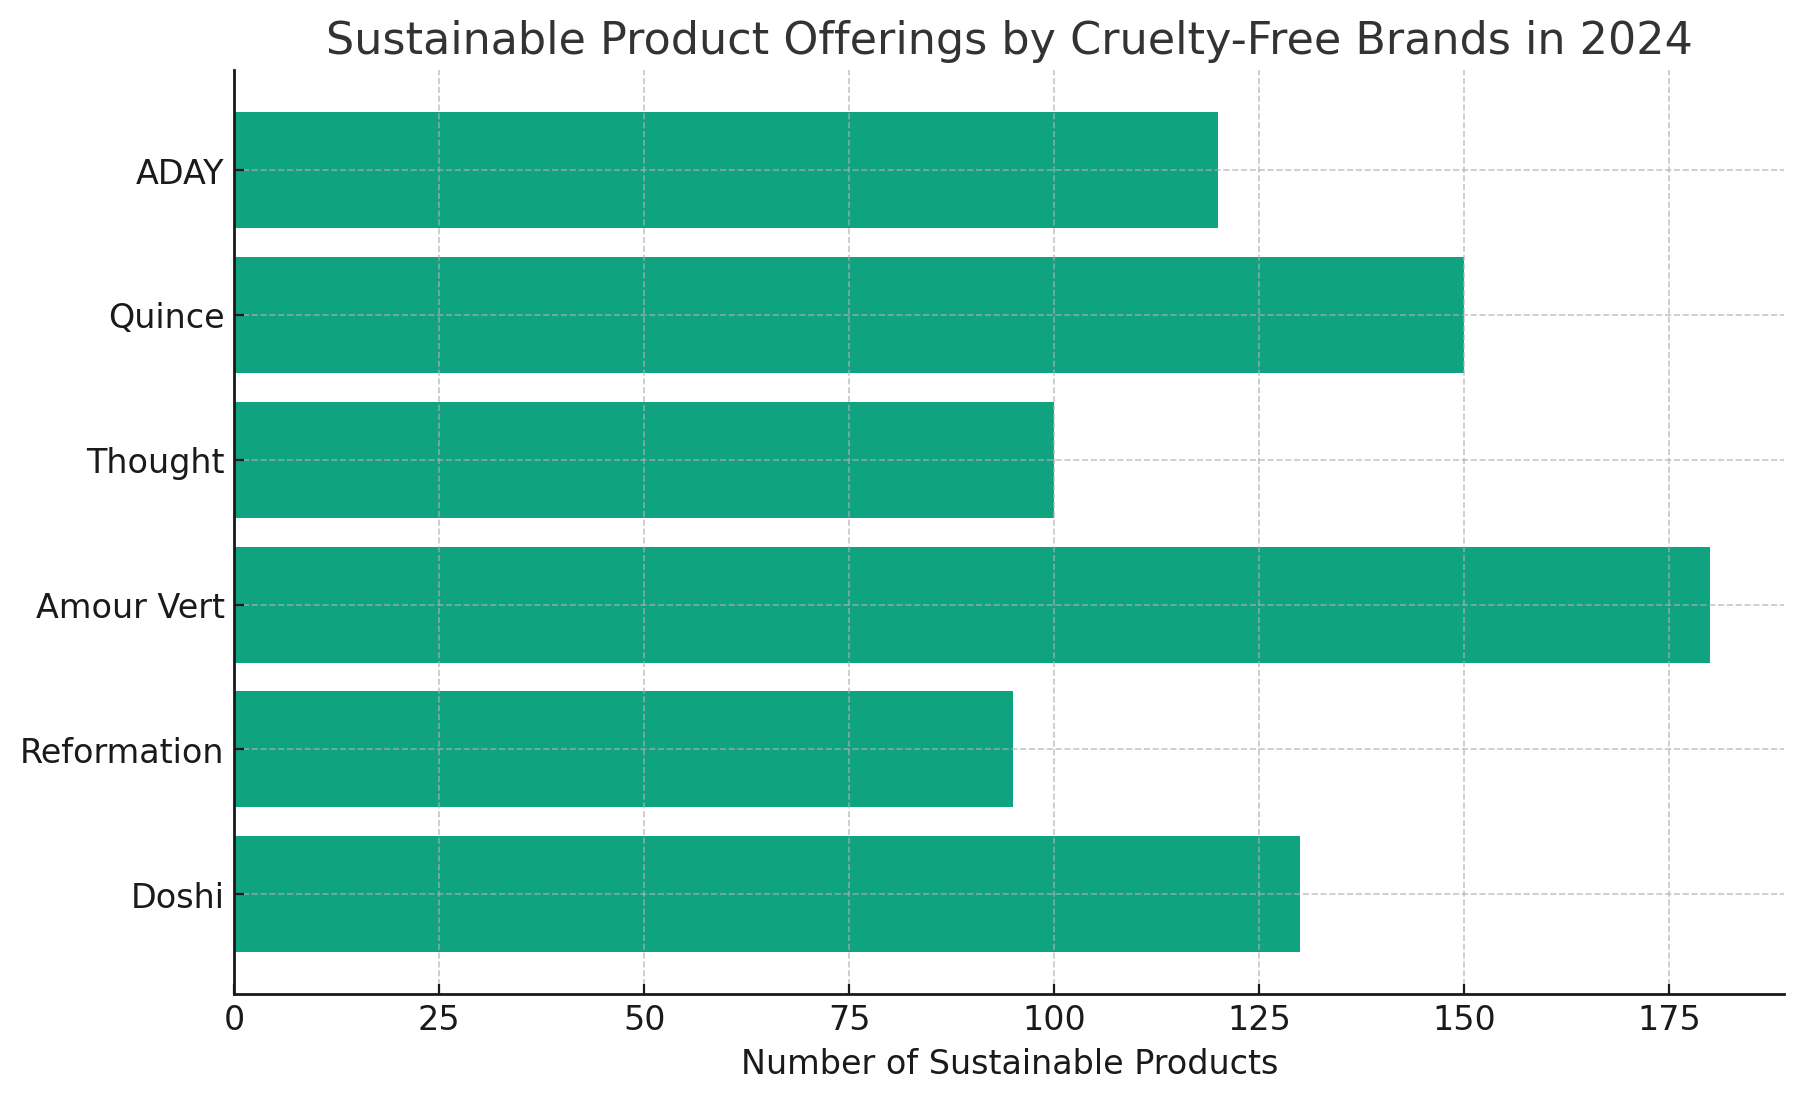 Consumer Interest in Sustainable Practices